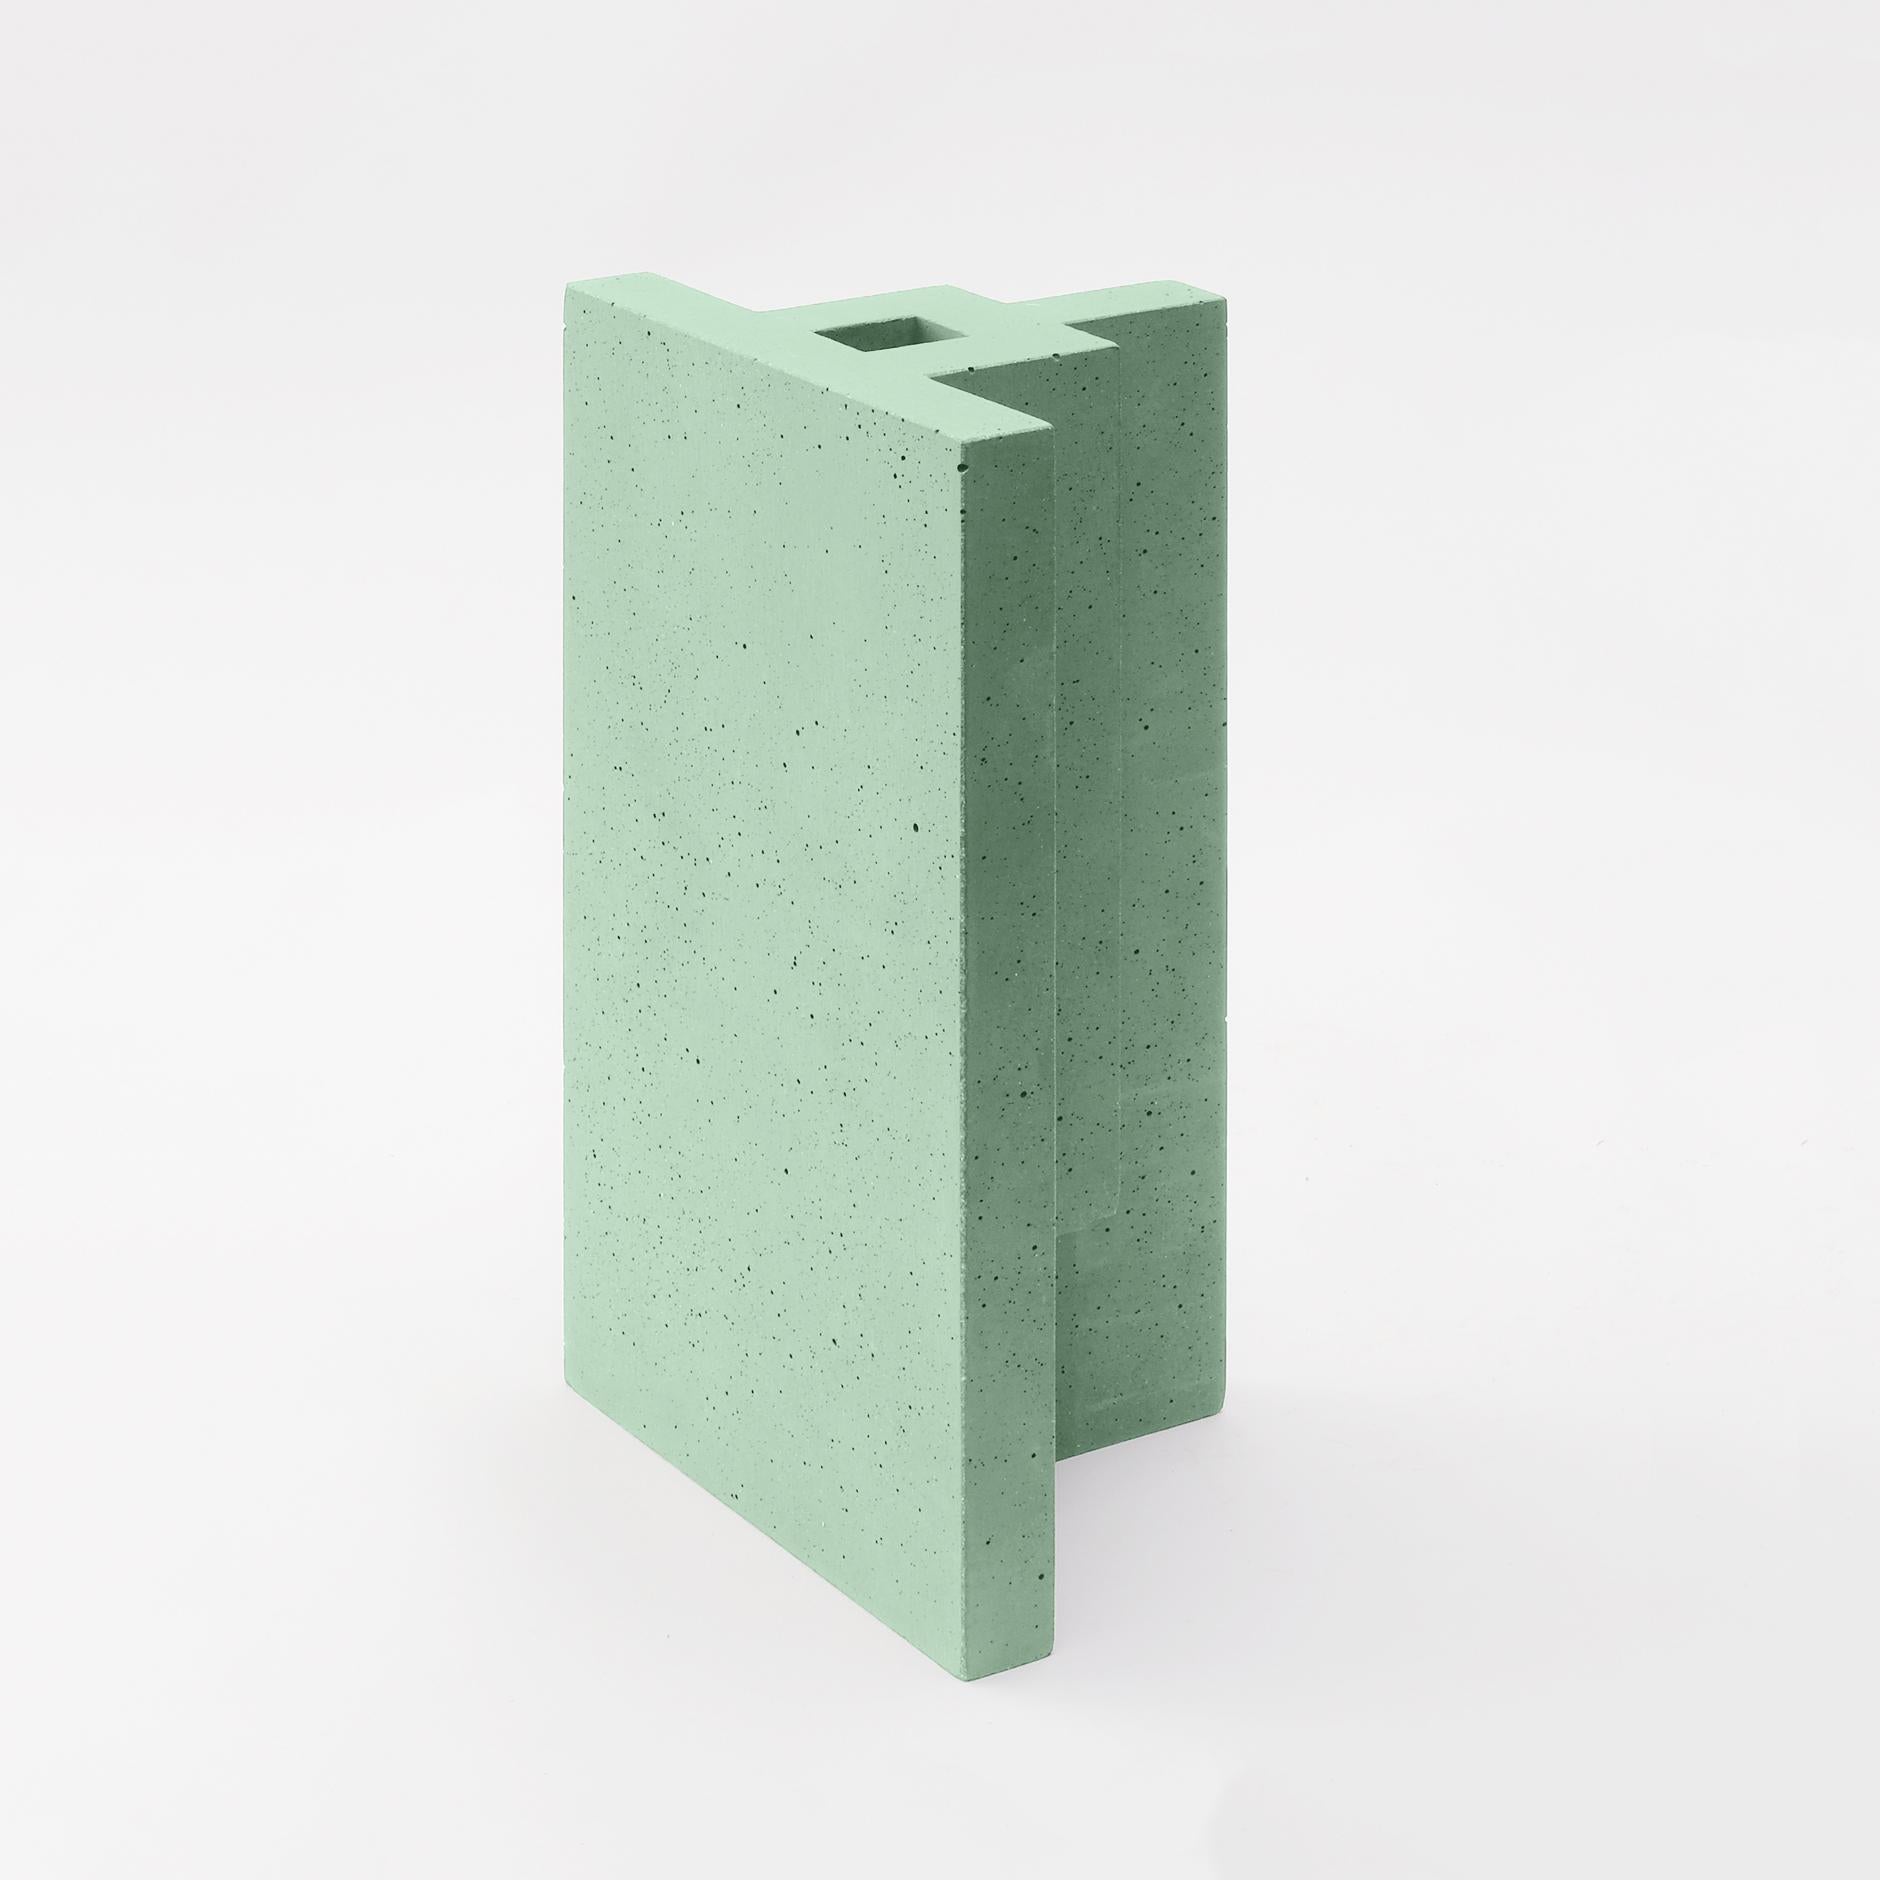 Chandigarh I - Mint Green - Design Vase Paolo Giordano Cement Cast
Chandigarh I - Mint Green

Chandigarh is a collection of vases inspired by the homonym city designed by Le Corbusier, who imagined and created it from nothing in India. The vases are